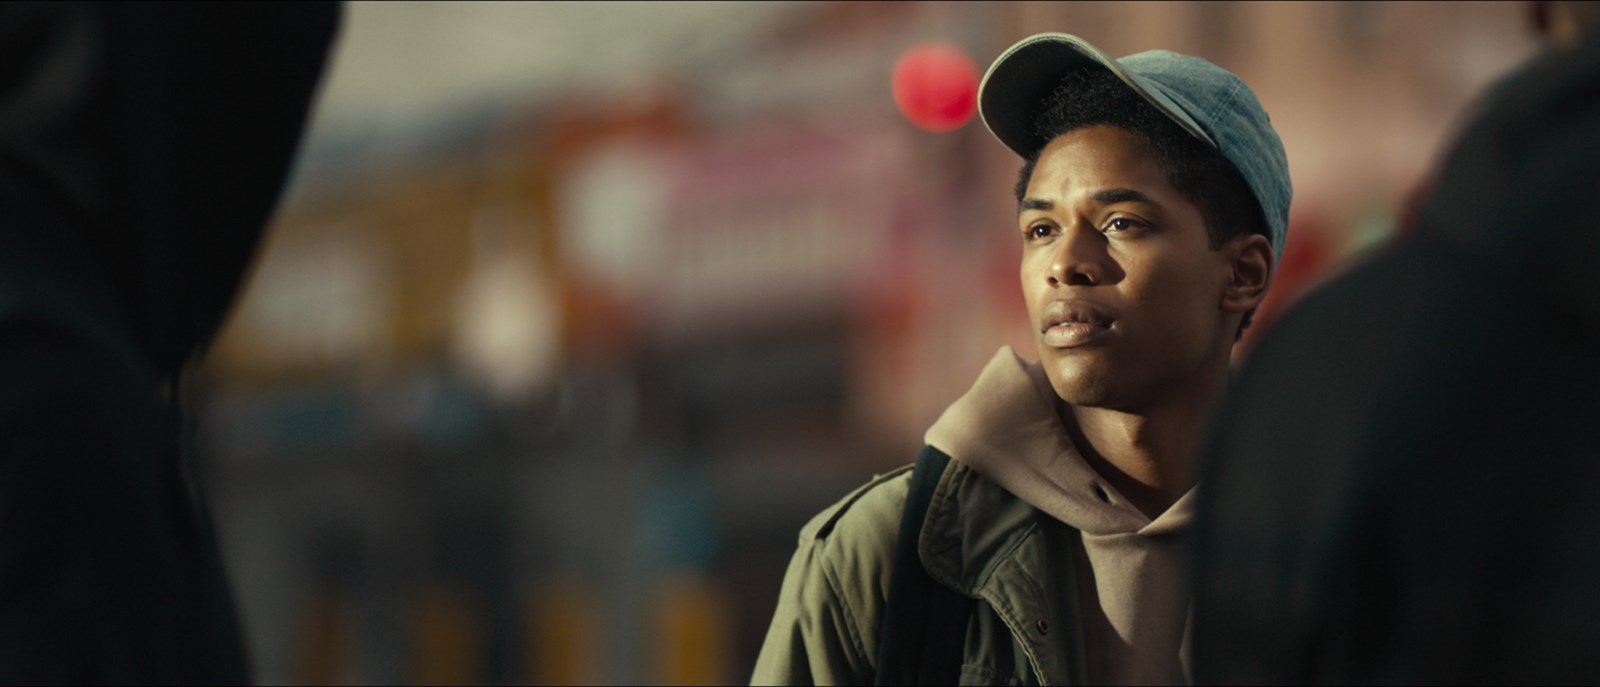 Urbanworld Film Festival 2019: Lineup Includes 'Harriet,' 'Just Mercy,' 'First Wives Club' And More